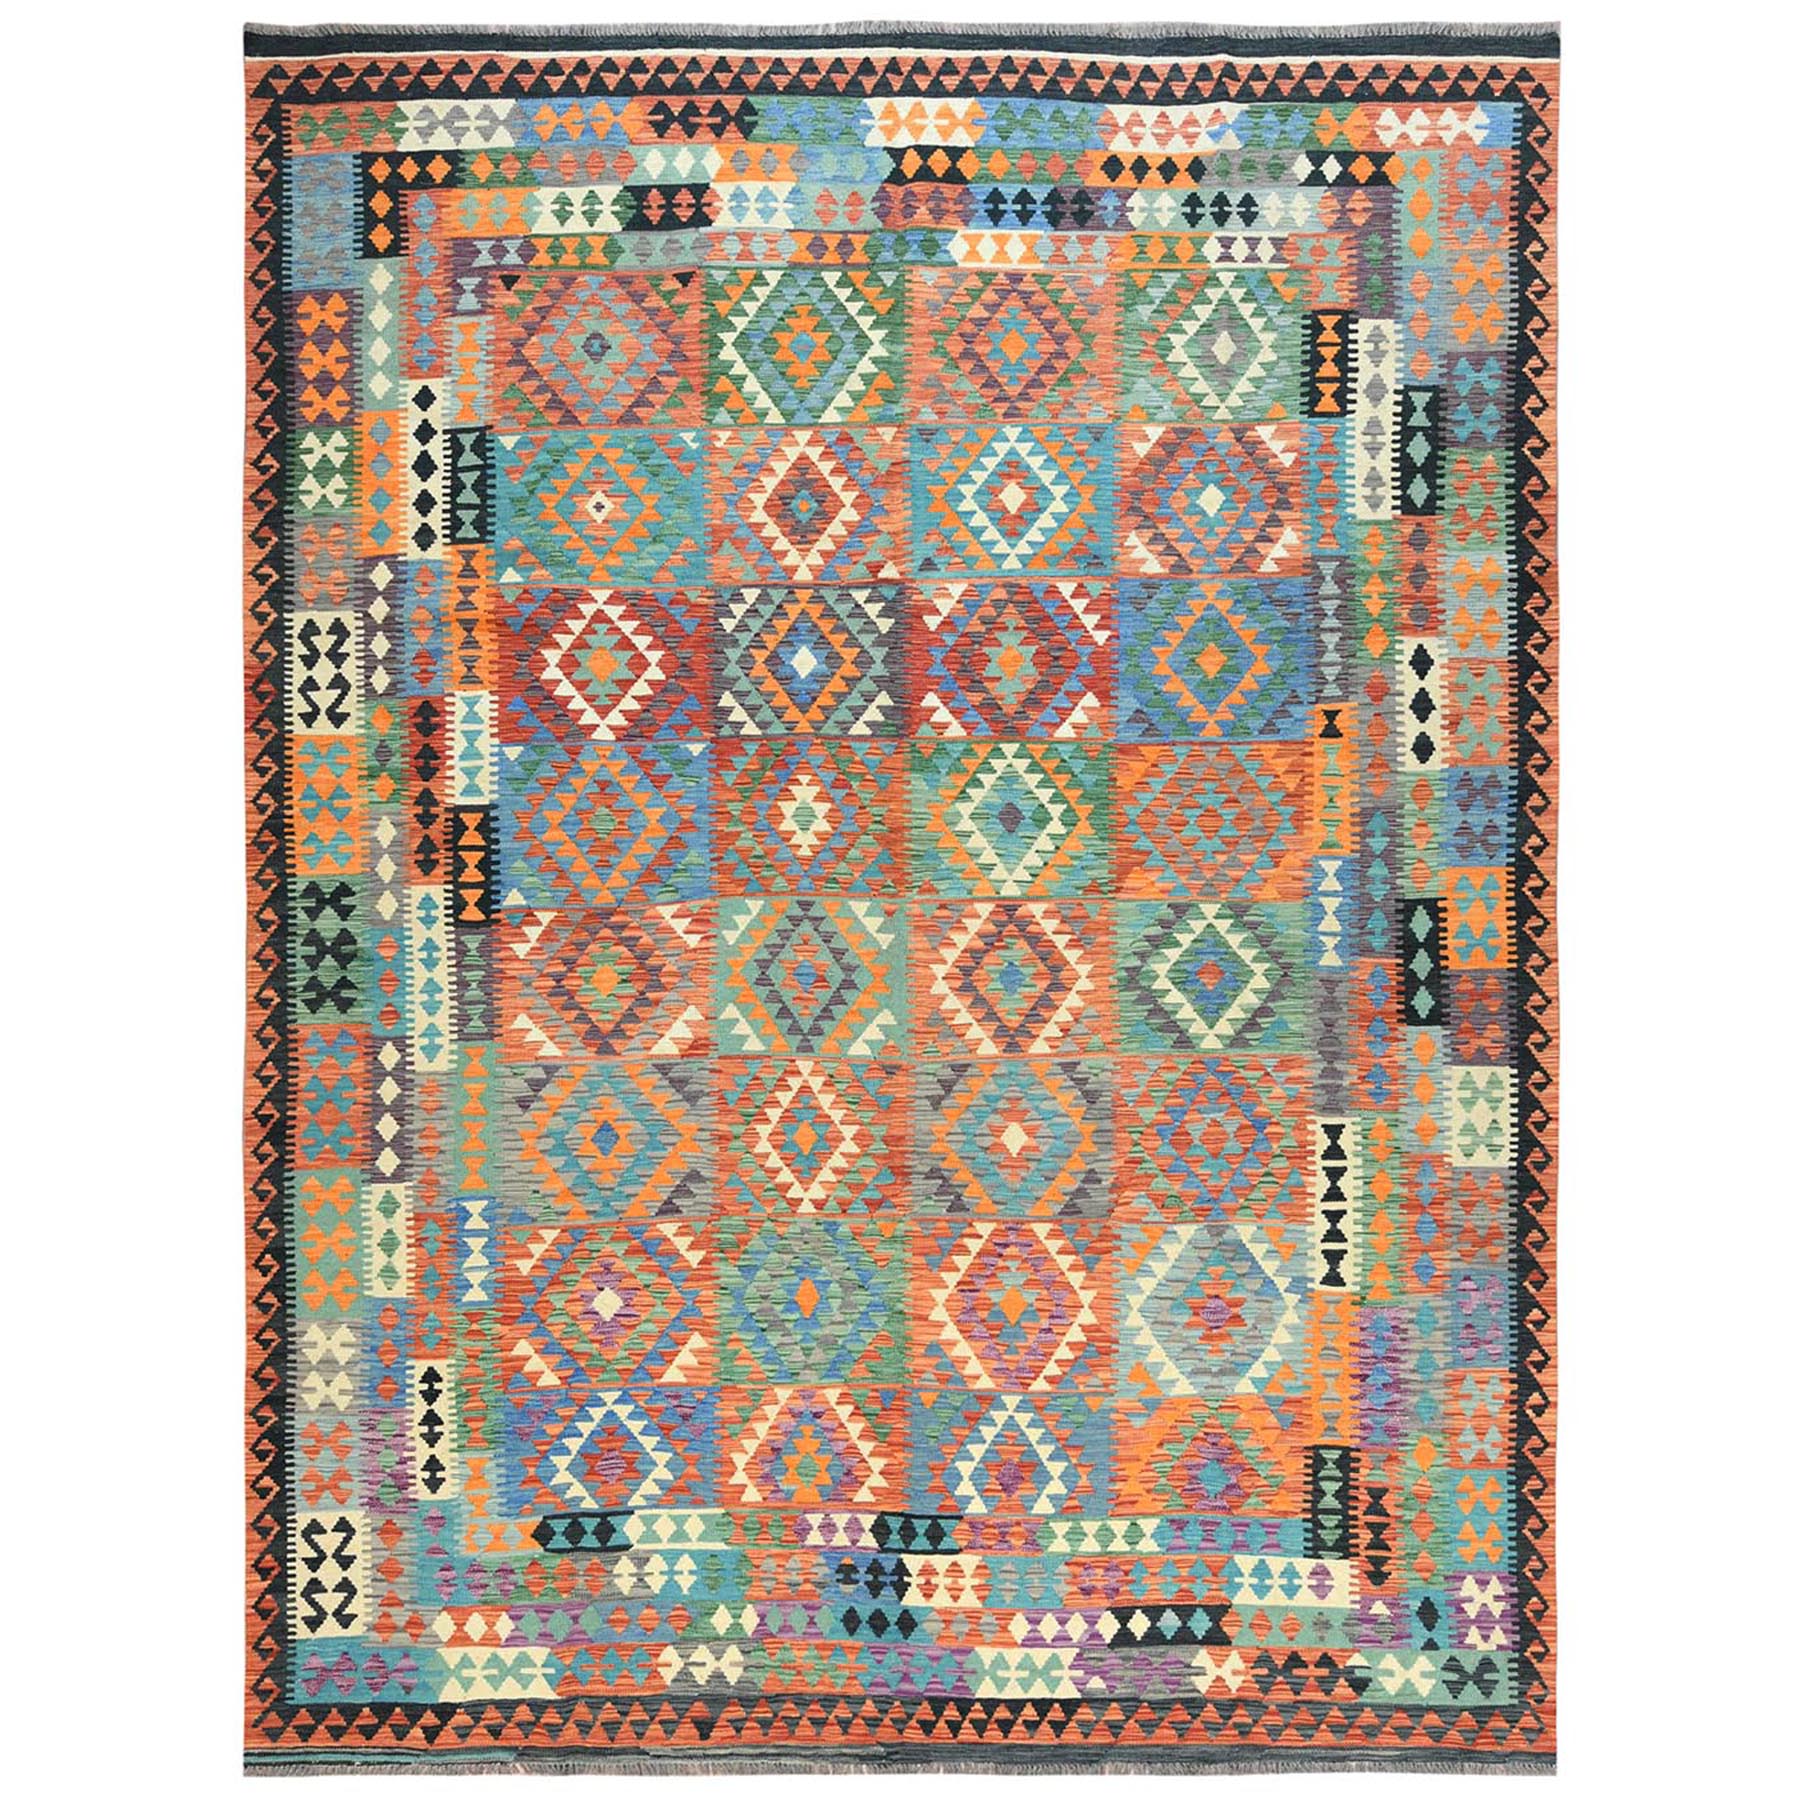 10'x13'1" Colorful, Pure Wool Hand Woven, Afghan Kilim with Geometric Design Flat Weave Veggie Dyes, Reversible Oriental Rug 